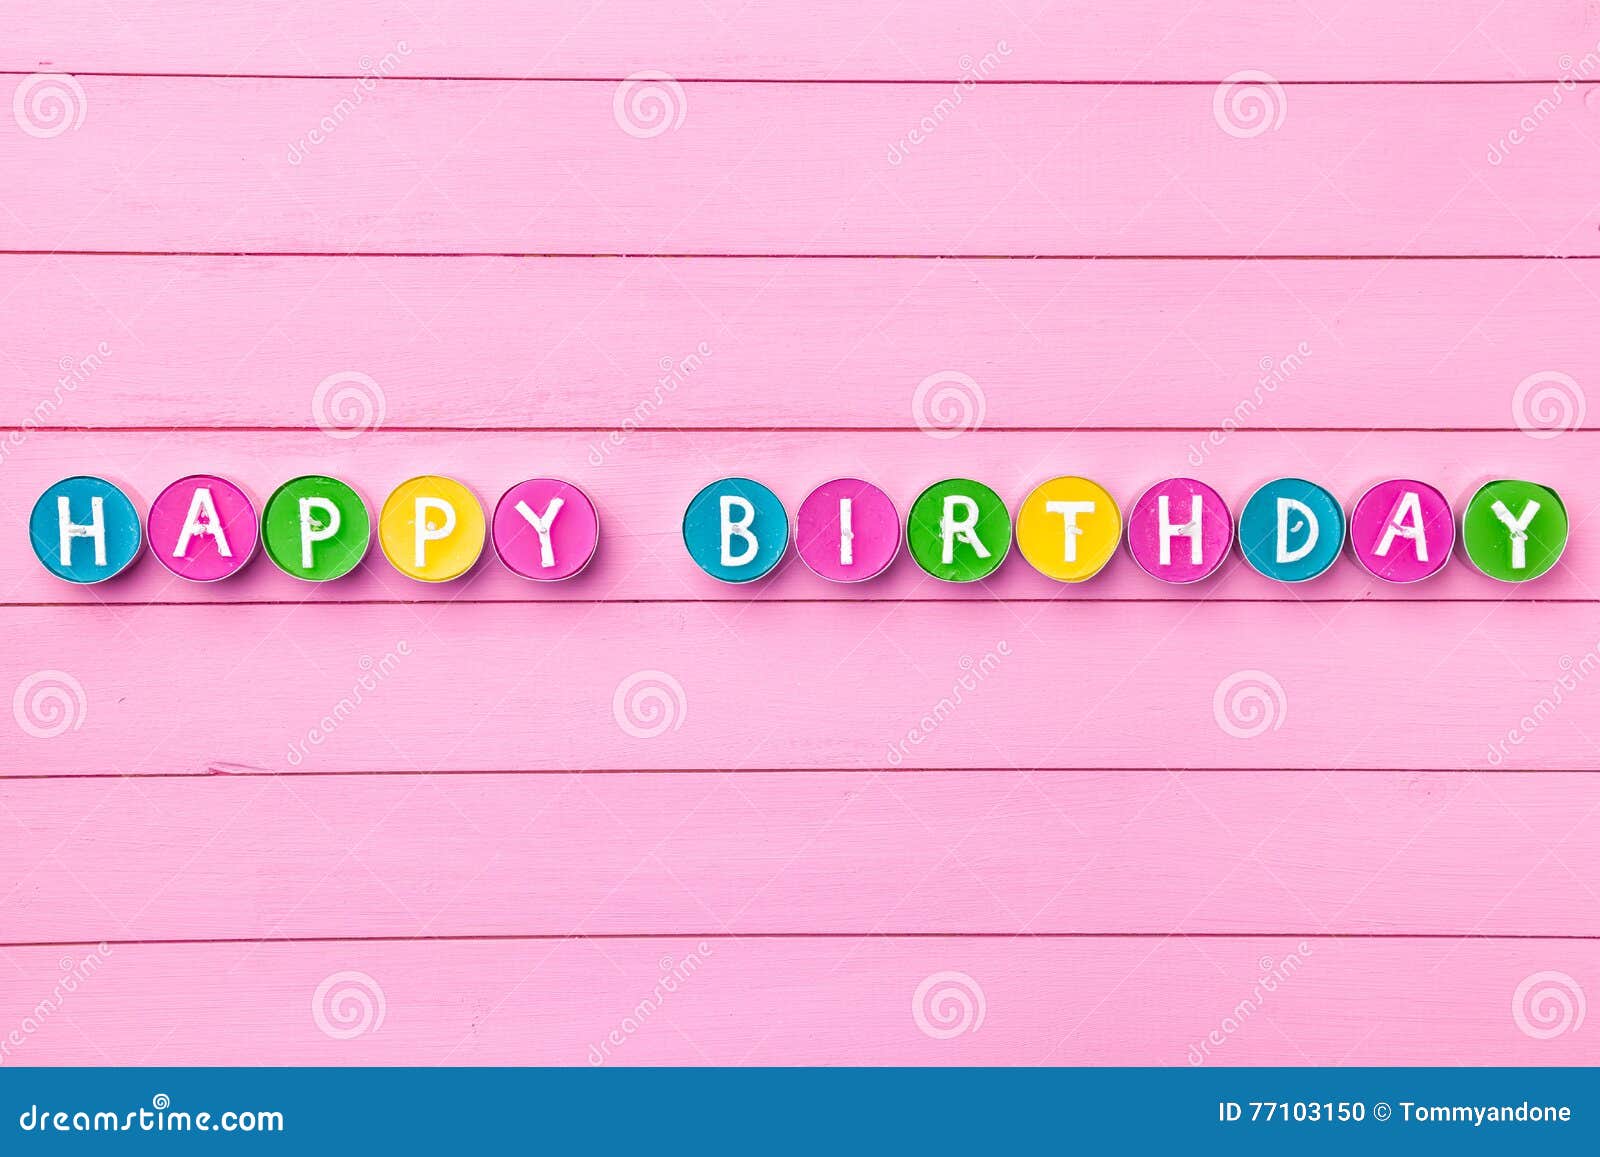 Colorful Happy Birthday Background Stock Photo - Image of color ...